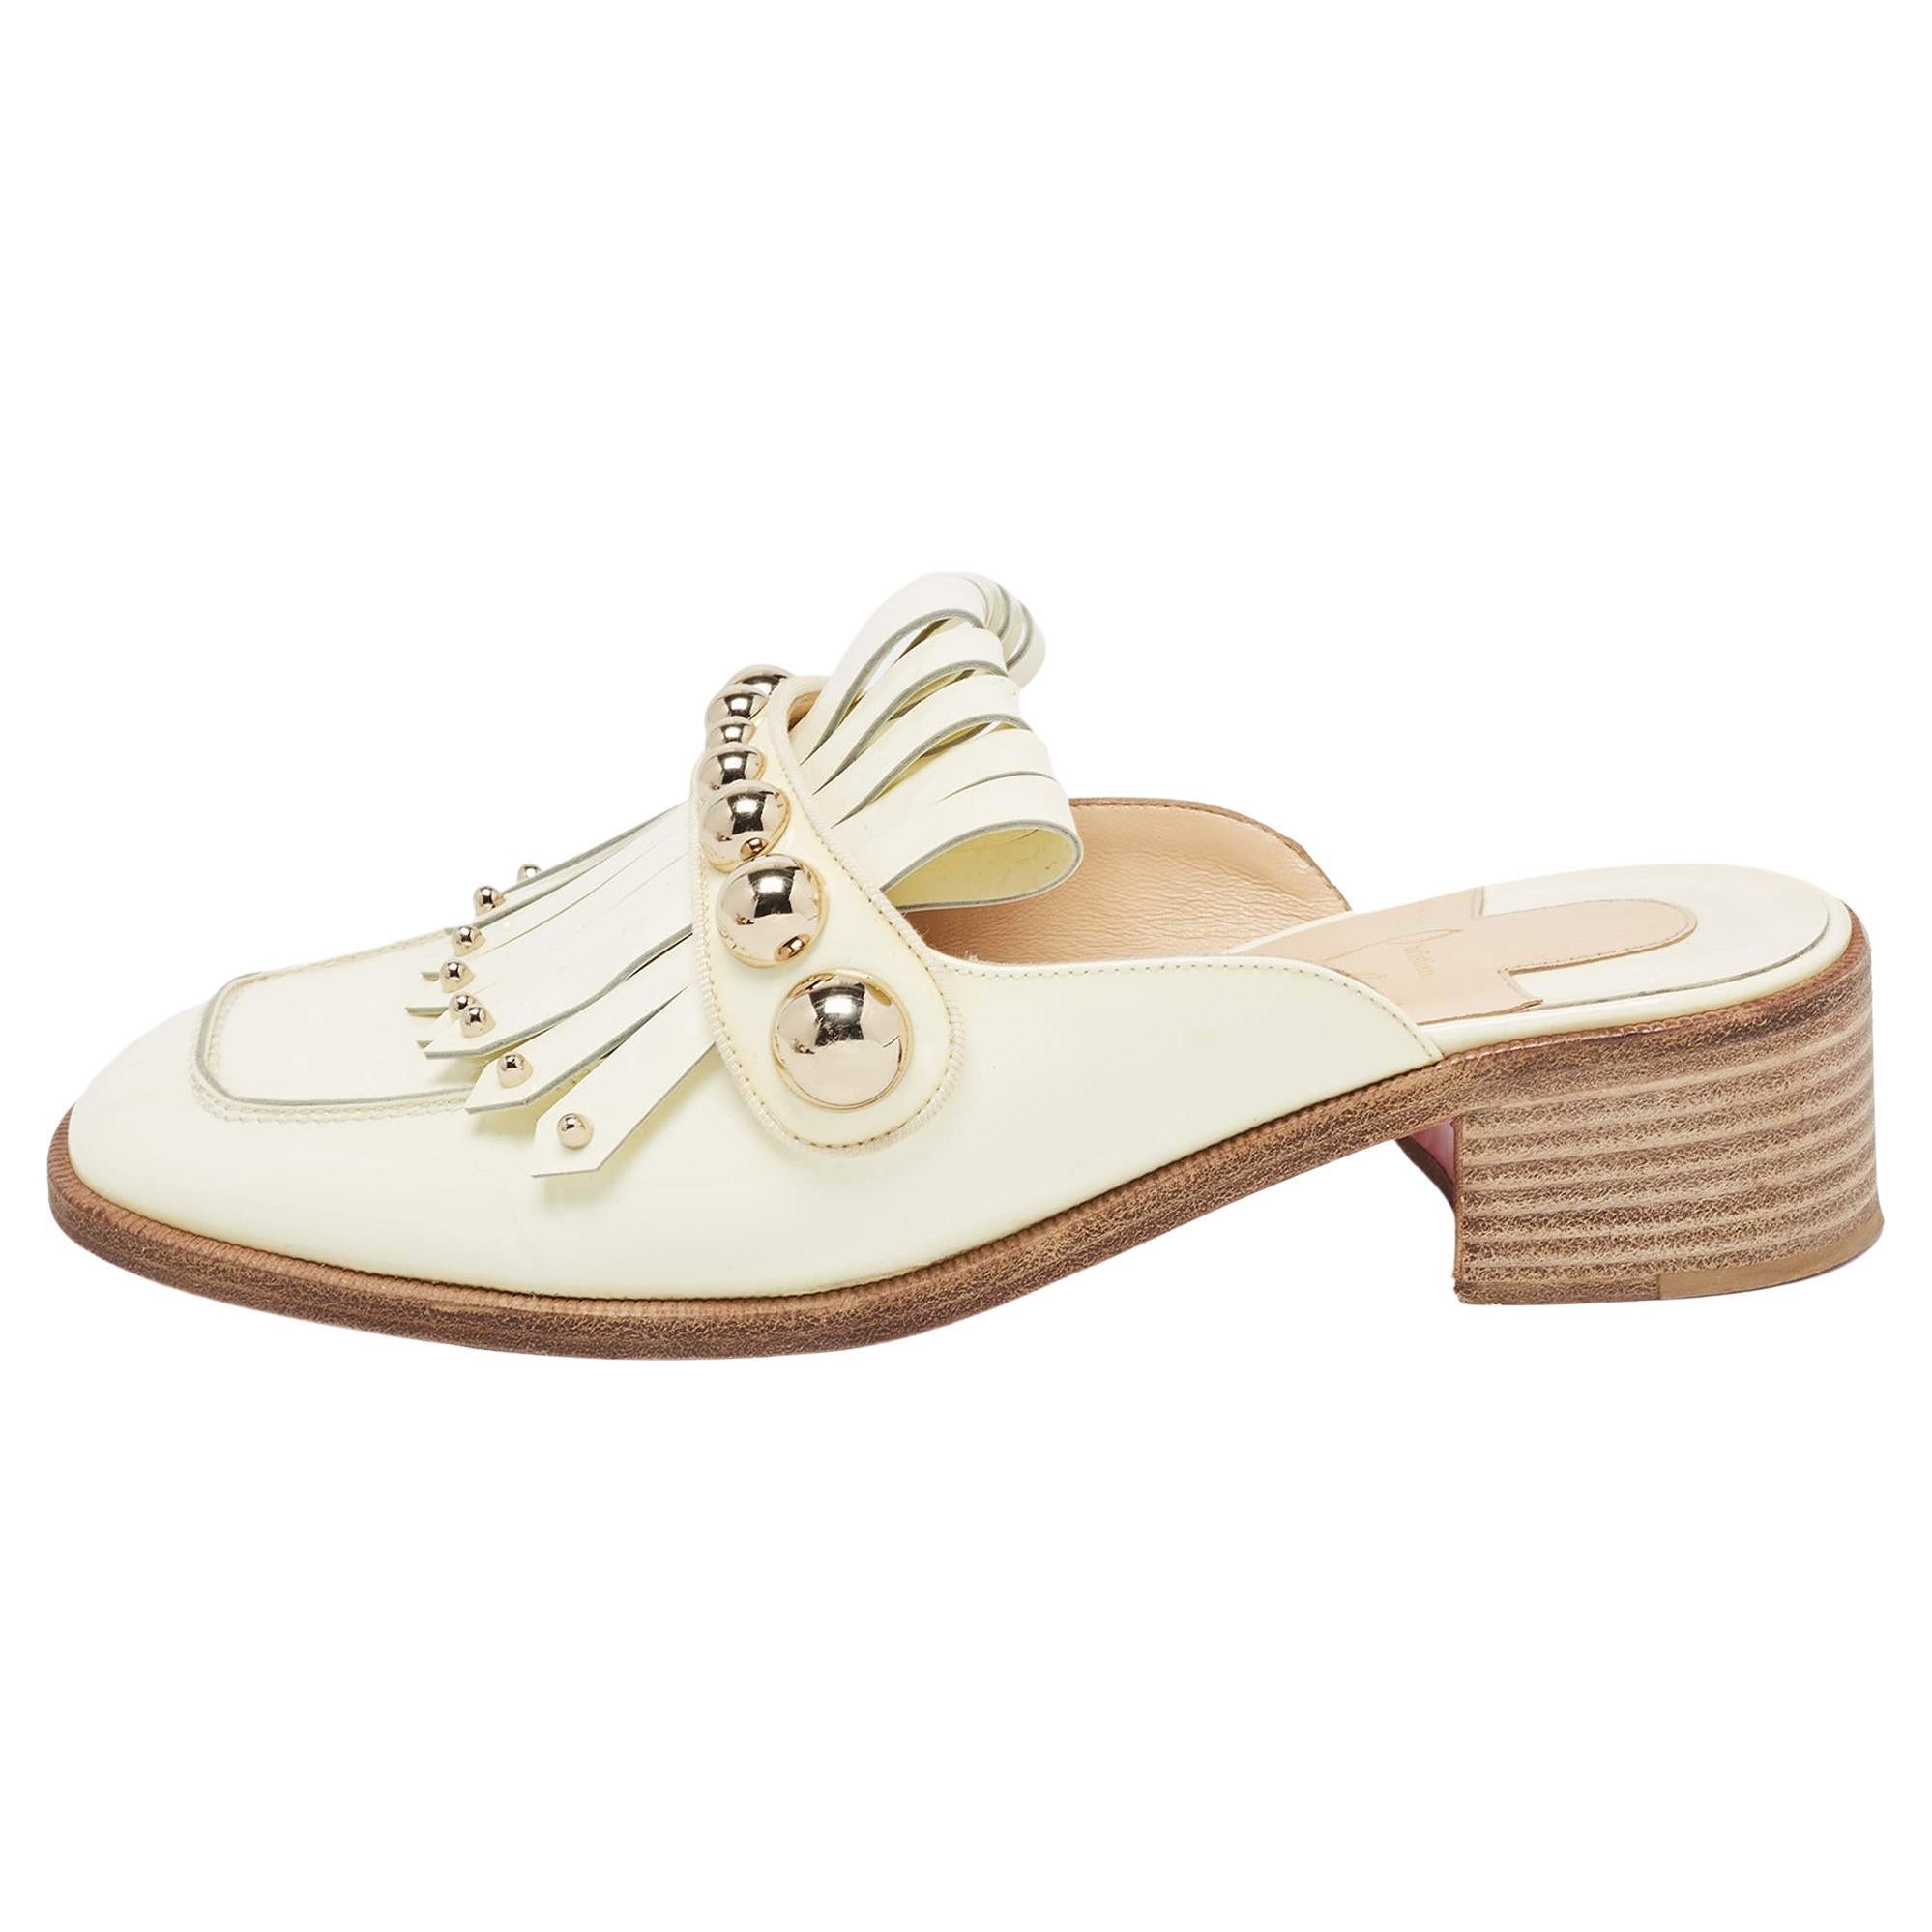 Christian Louboutin Cream Patent Leather Octavian Mules Size 36.5 For Sale